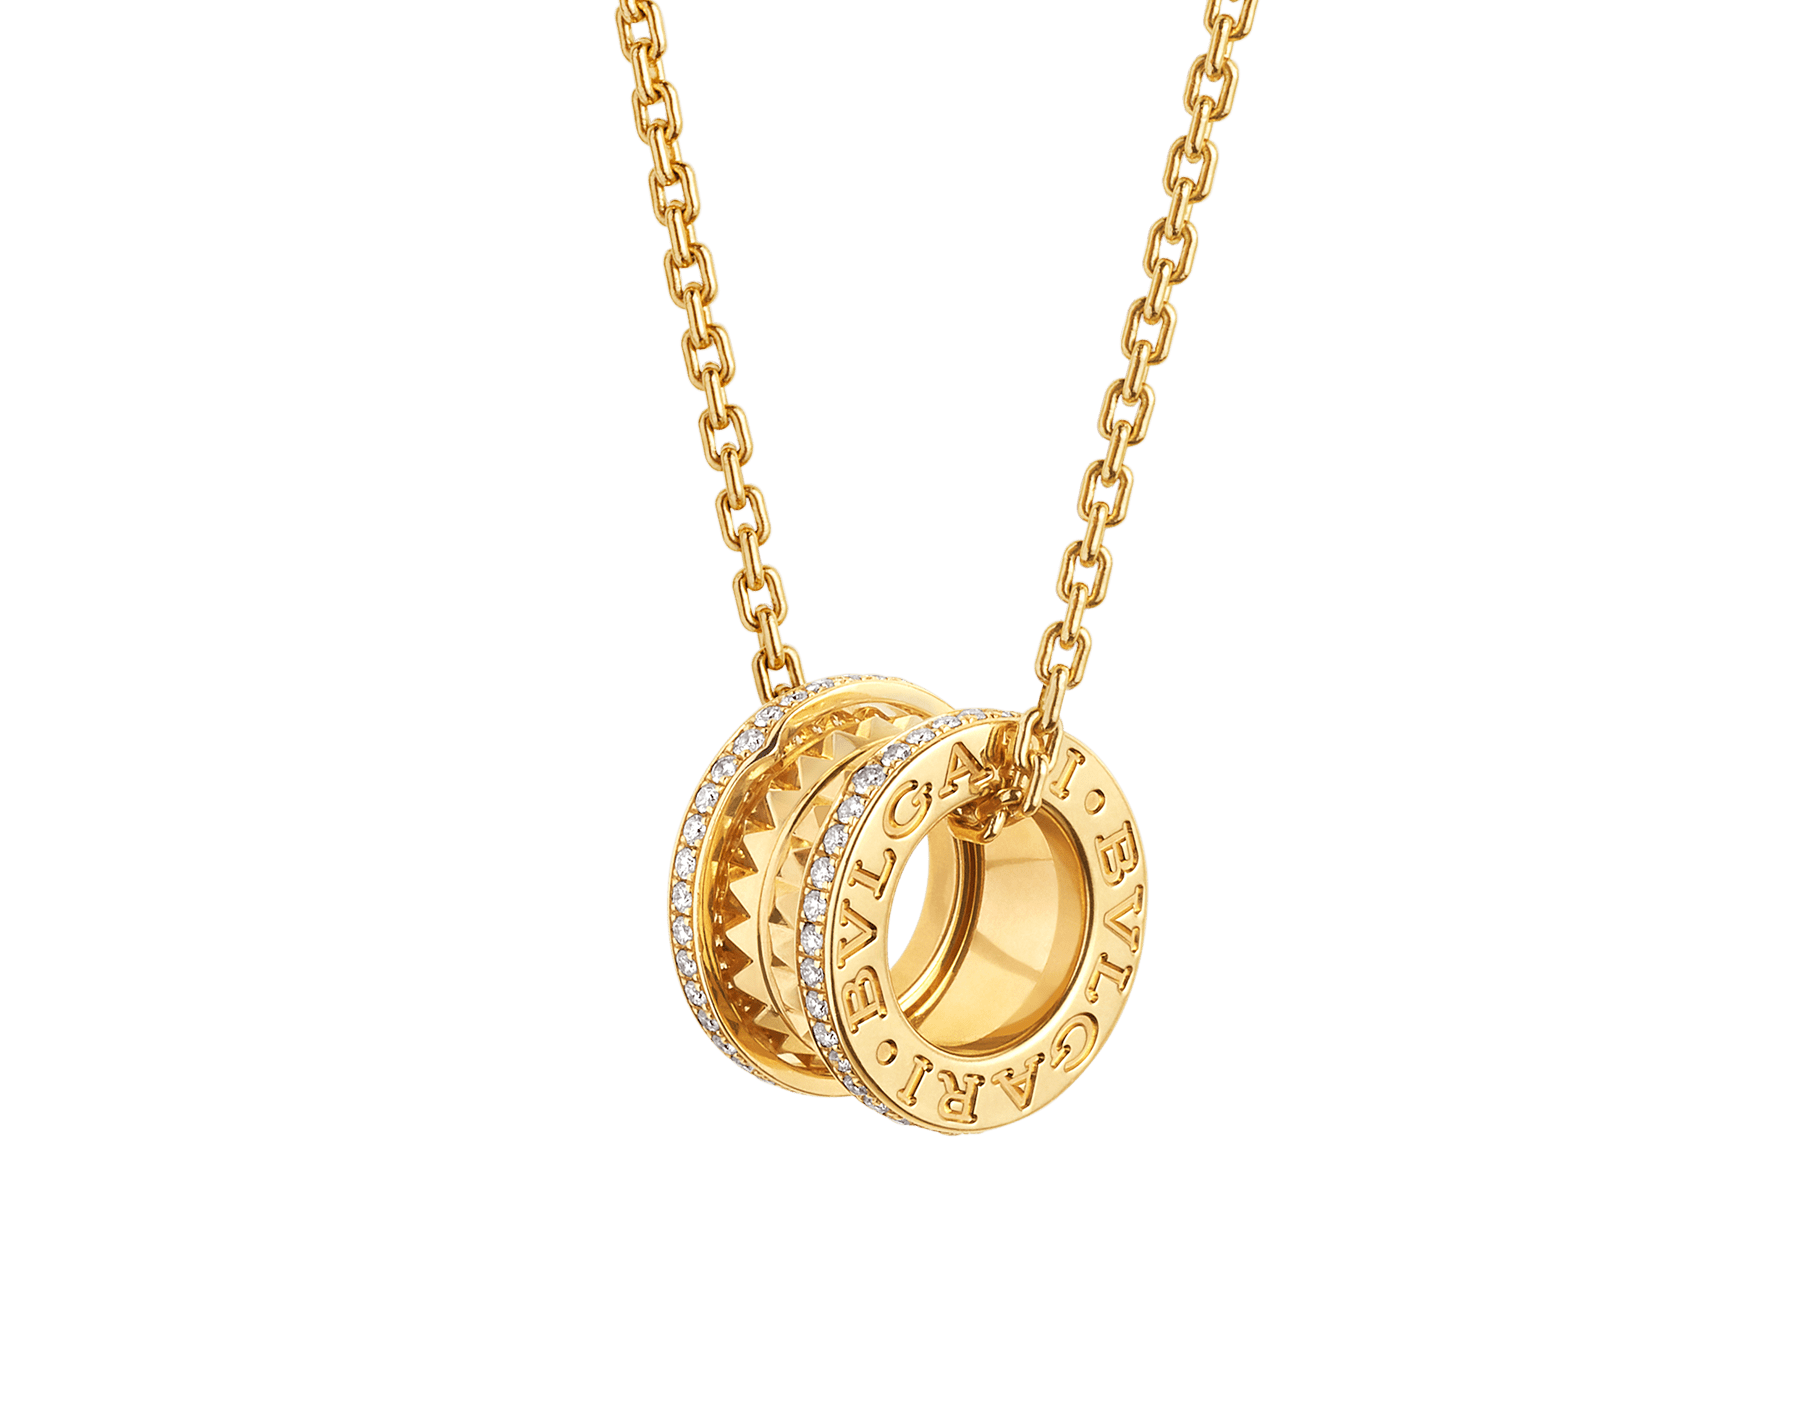 B.zero1 Rock necklace with 18 kt yellow gold pendant replica